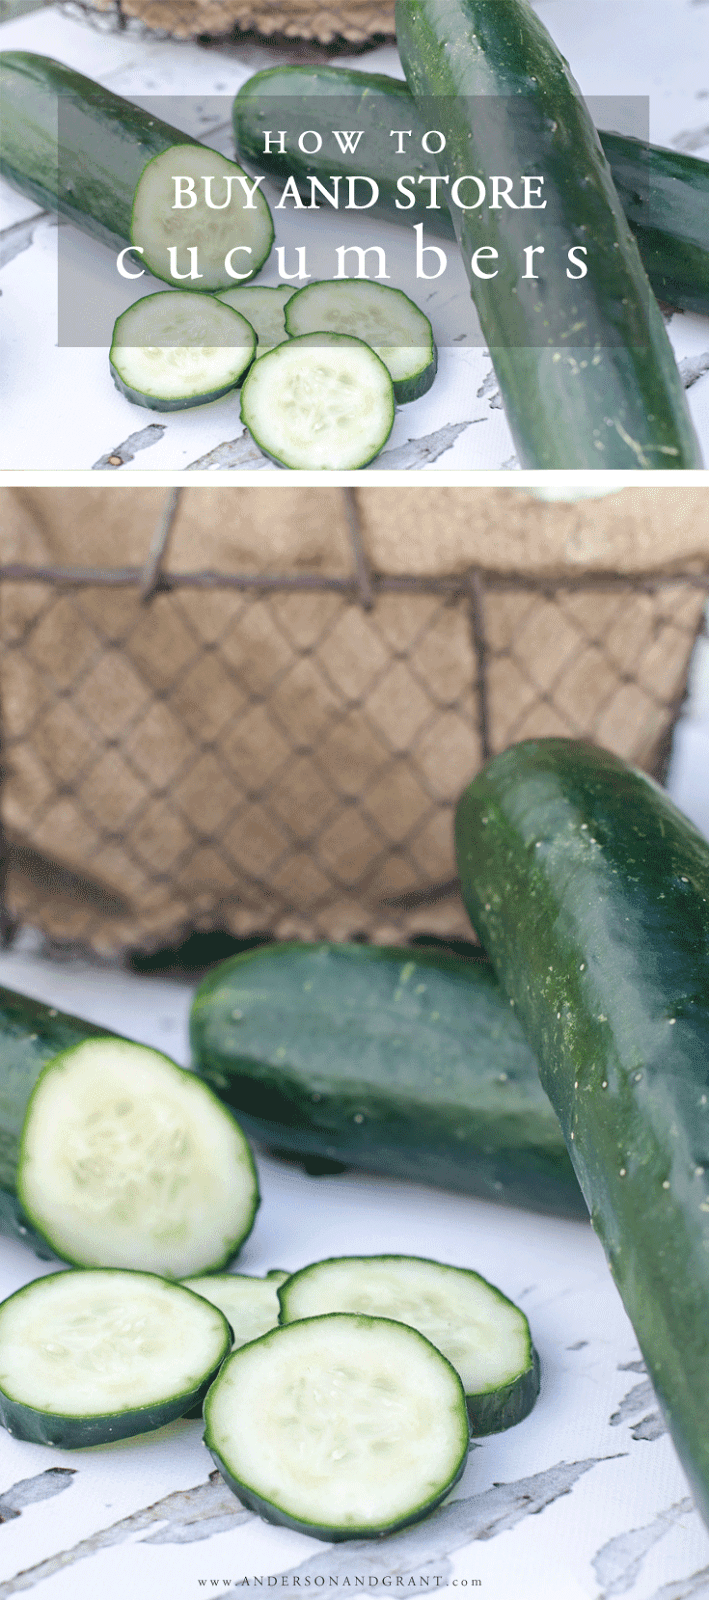 Learn how to choose the best cucumbers at the market and how to store them once you bring the fruit home.  |  www.andersonandgrant.com